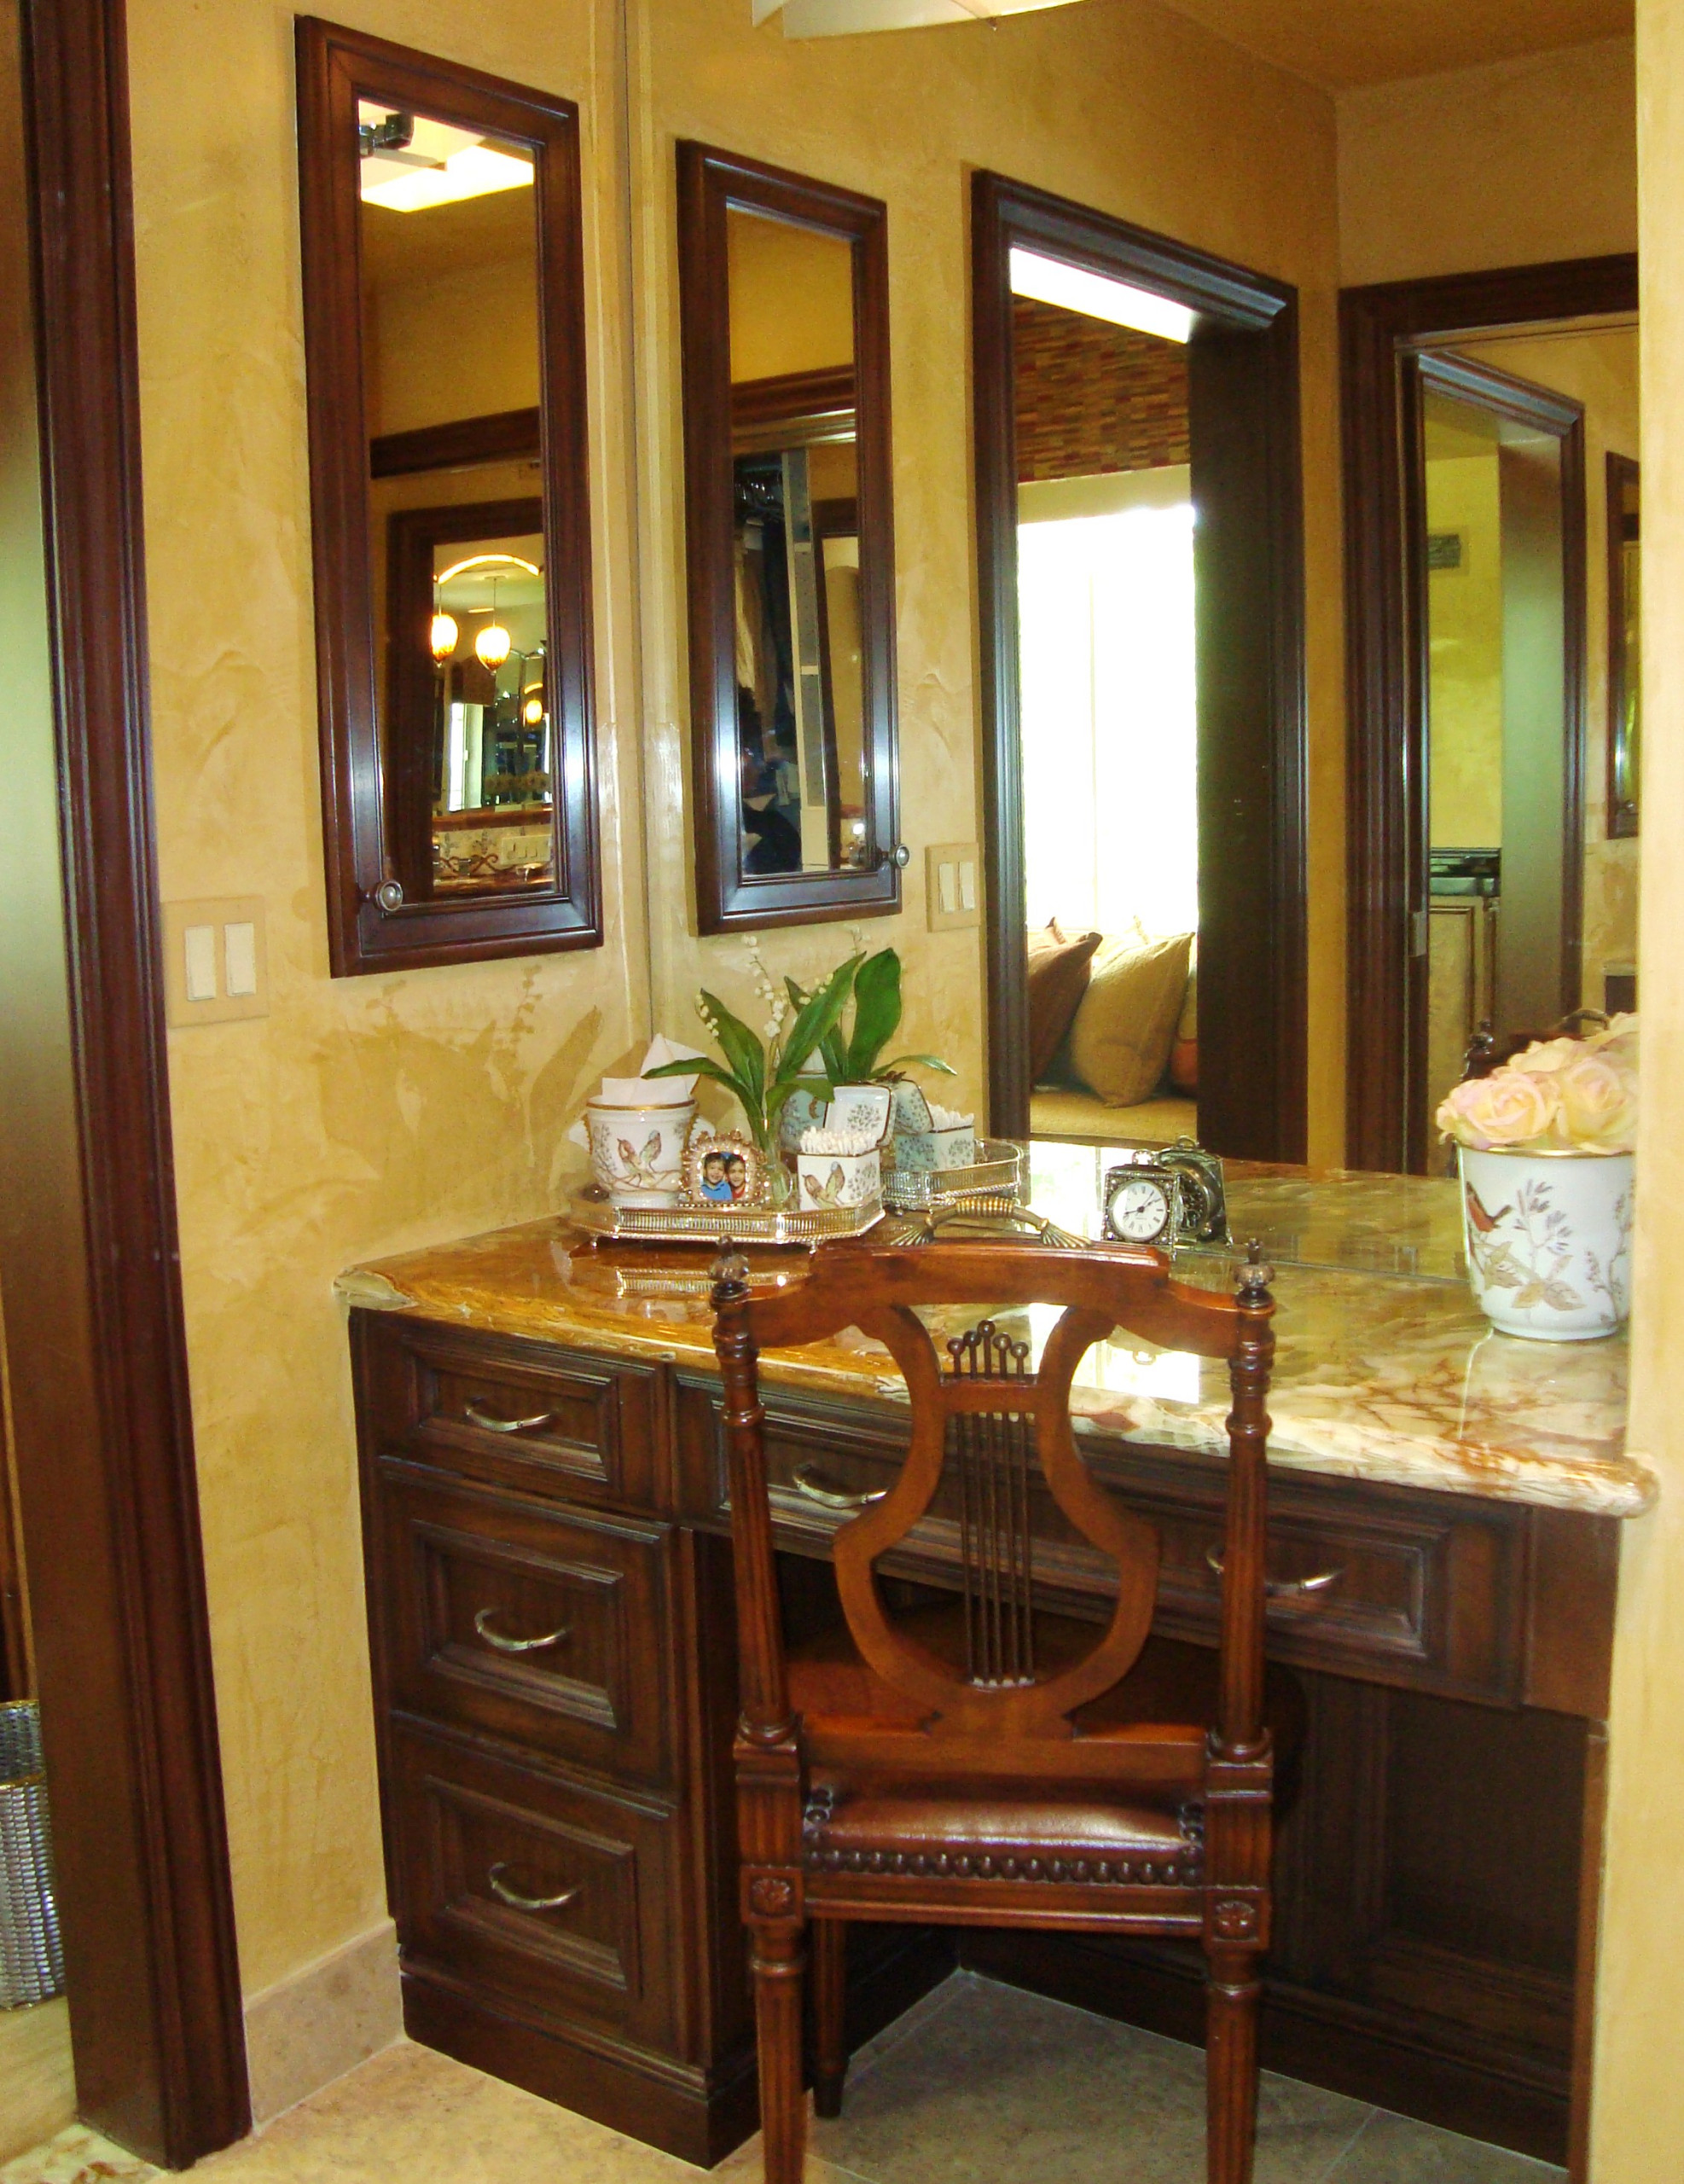 The Rubin-Onyx counter top in "her" dressing area with Woodmode cabinetry